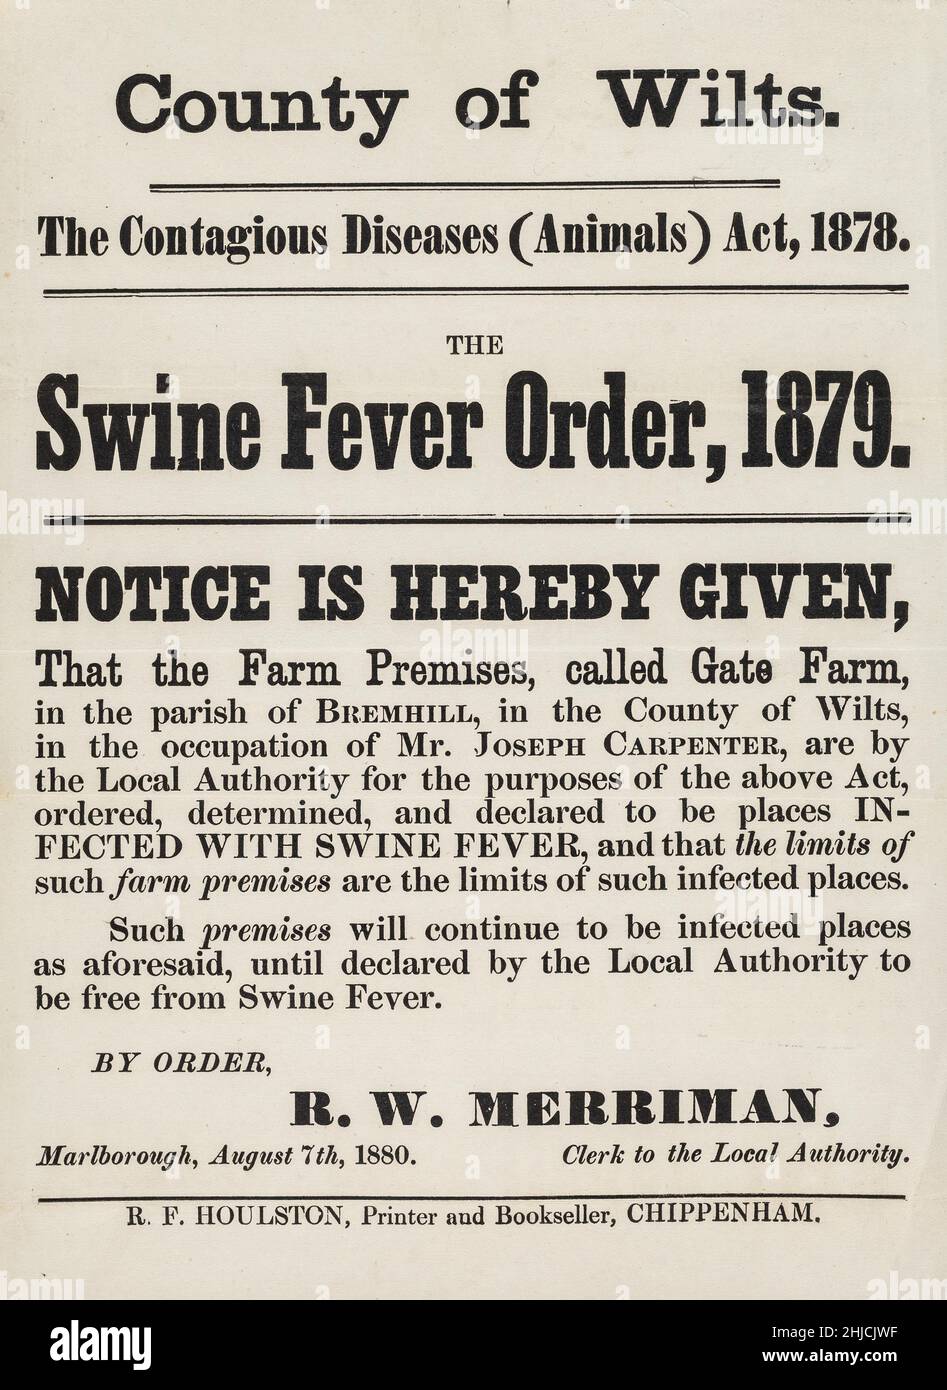 Swine fever order. Farm quarantine, 1879. 'Notice is hereby given that the farm premises, called Gate Farm, in the parish of Bremhill, in the county of Wilts, in the occupation of Mr. Joseph Carpenter, are by the Local Authority for the purposes of the above act, ordered, determined, and declared to be places INFECTED WITH SWINE FEVER,' etc. Stock Photo